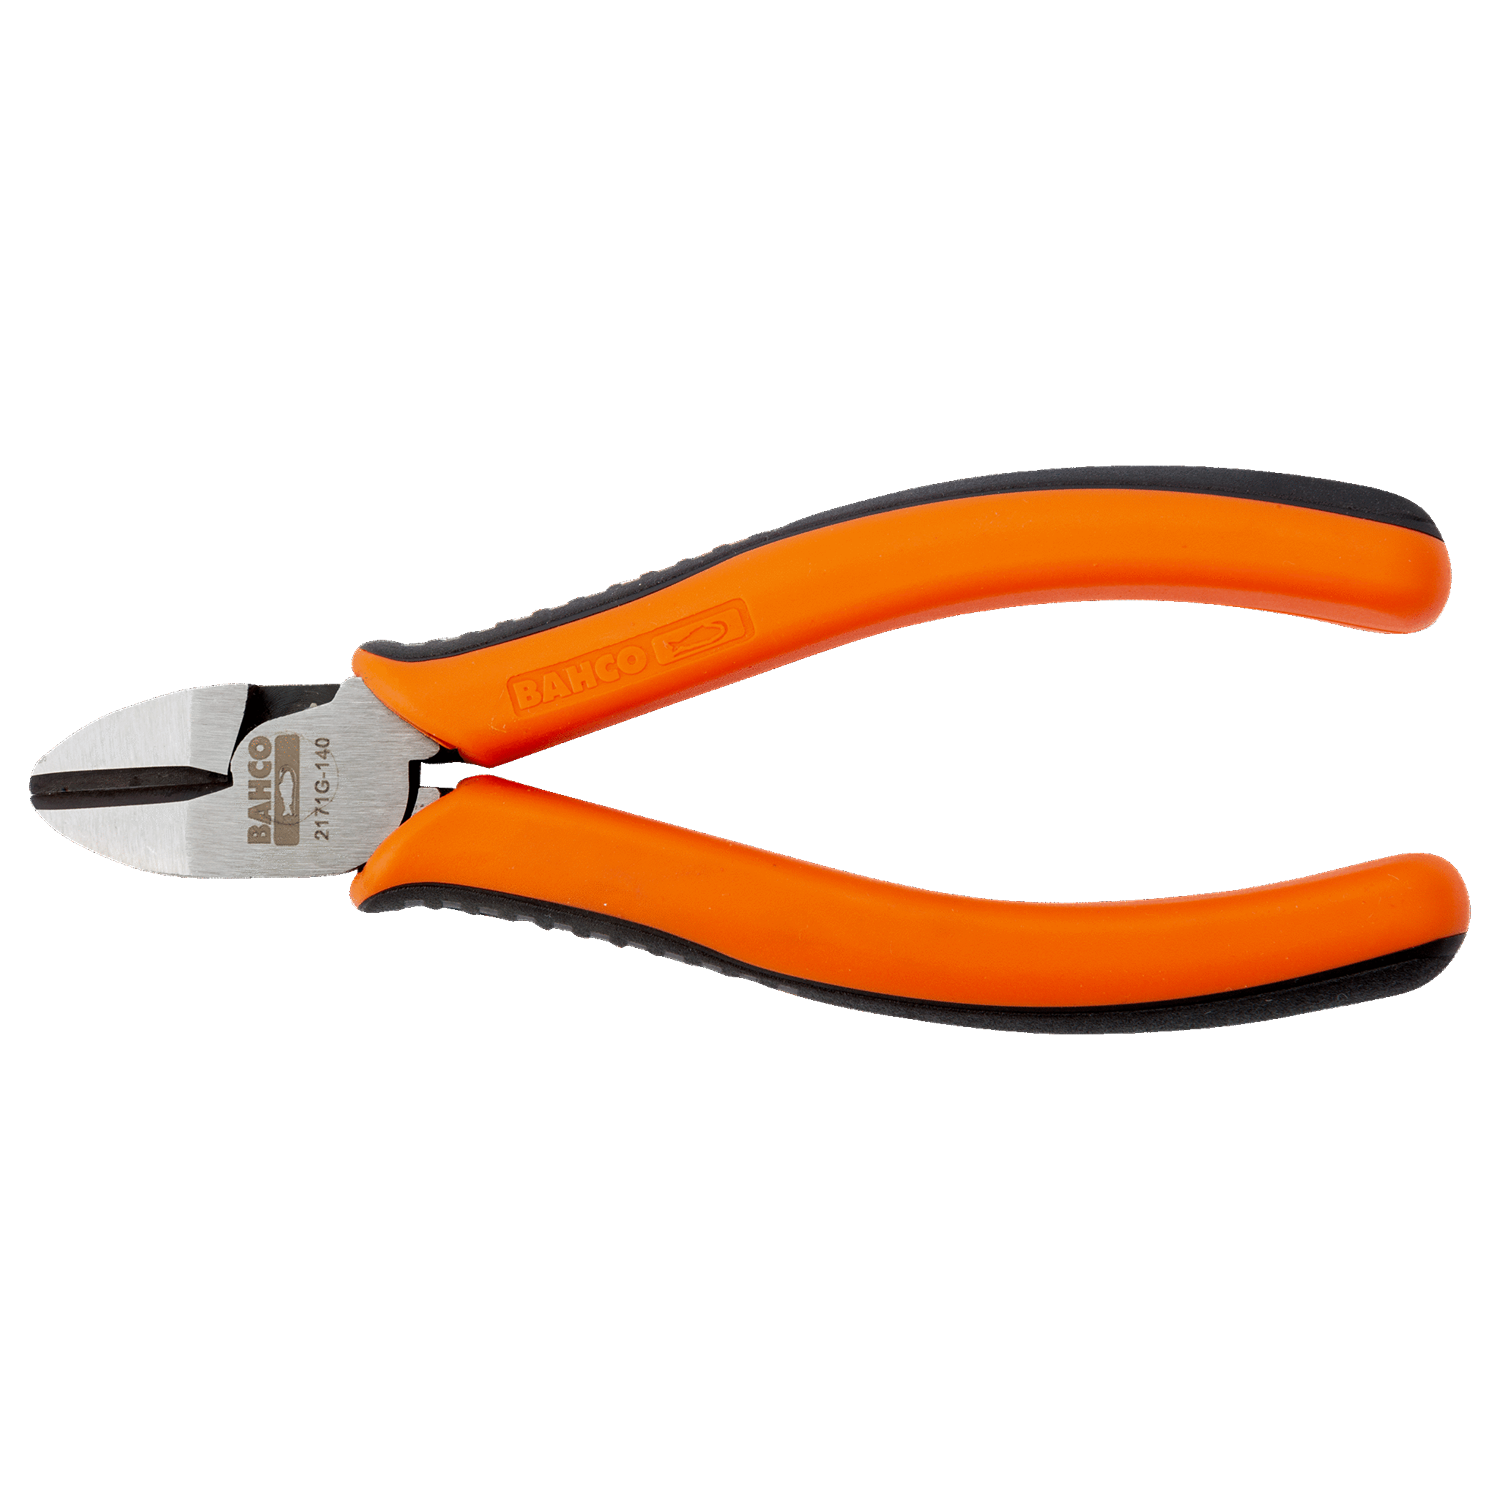 BAHCO 2171G Side Cutting Plier with Dual-Component Handle - Premium Cutting Plier from BAHCO - Shop now at Yew Aik.